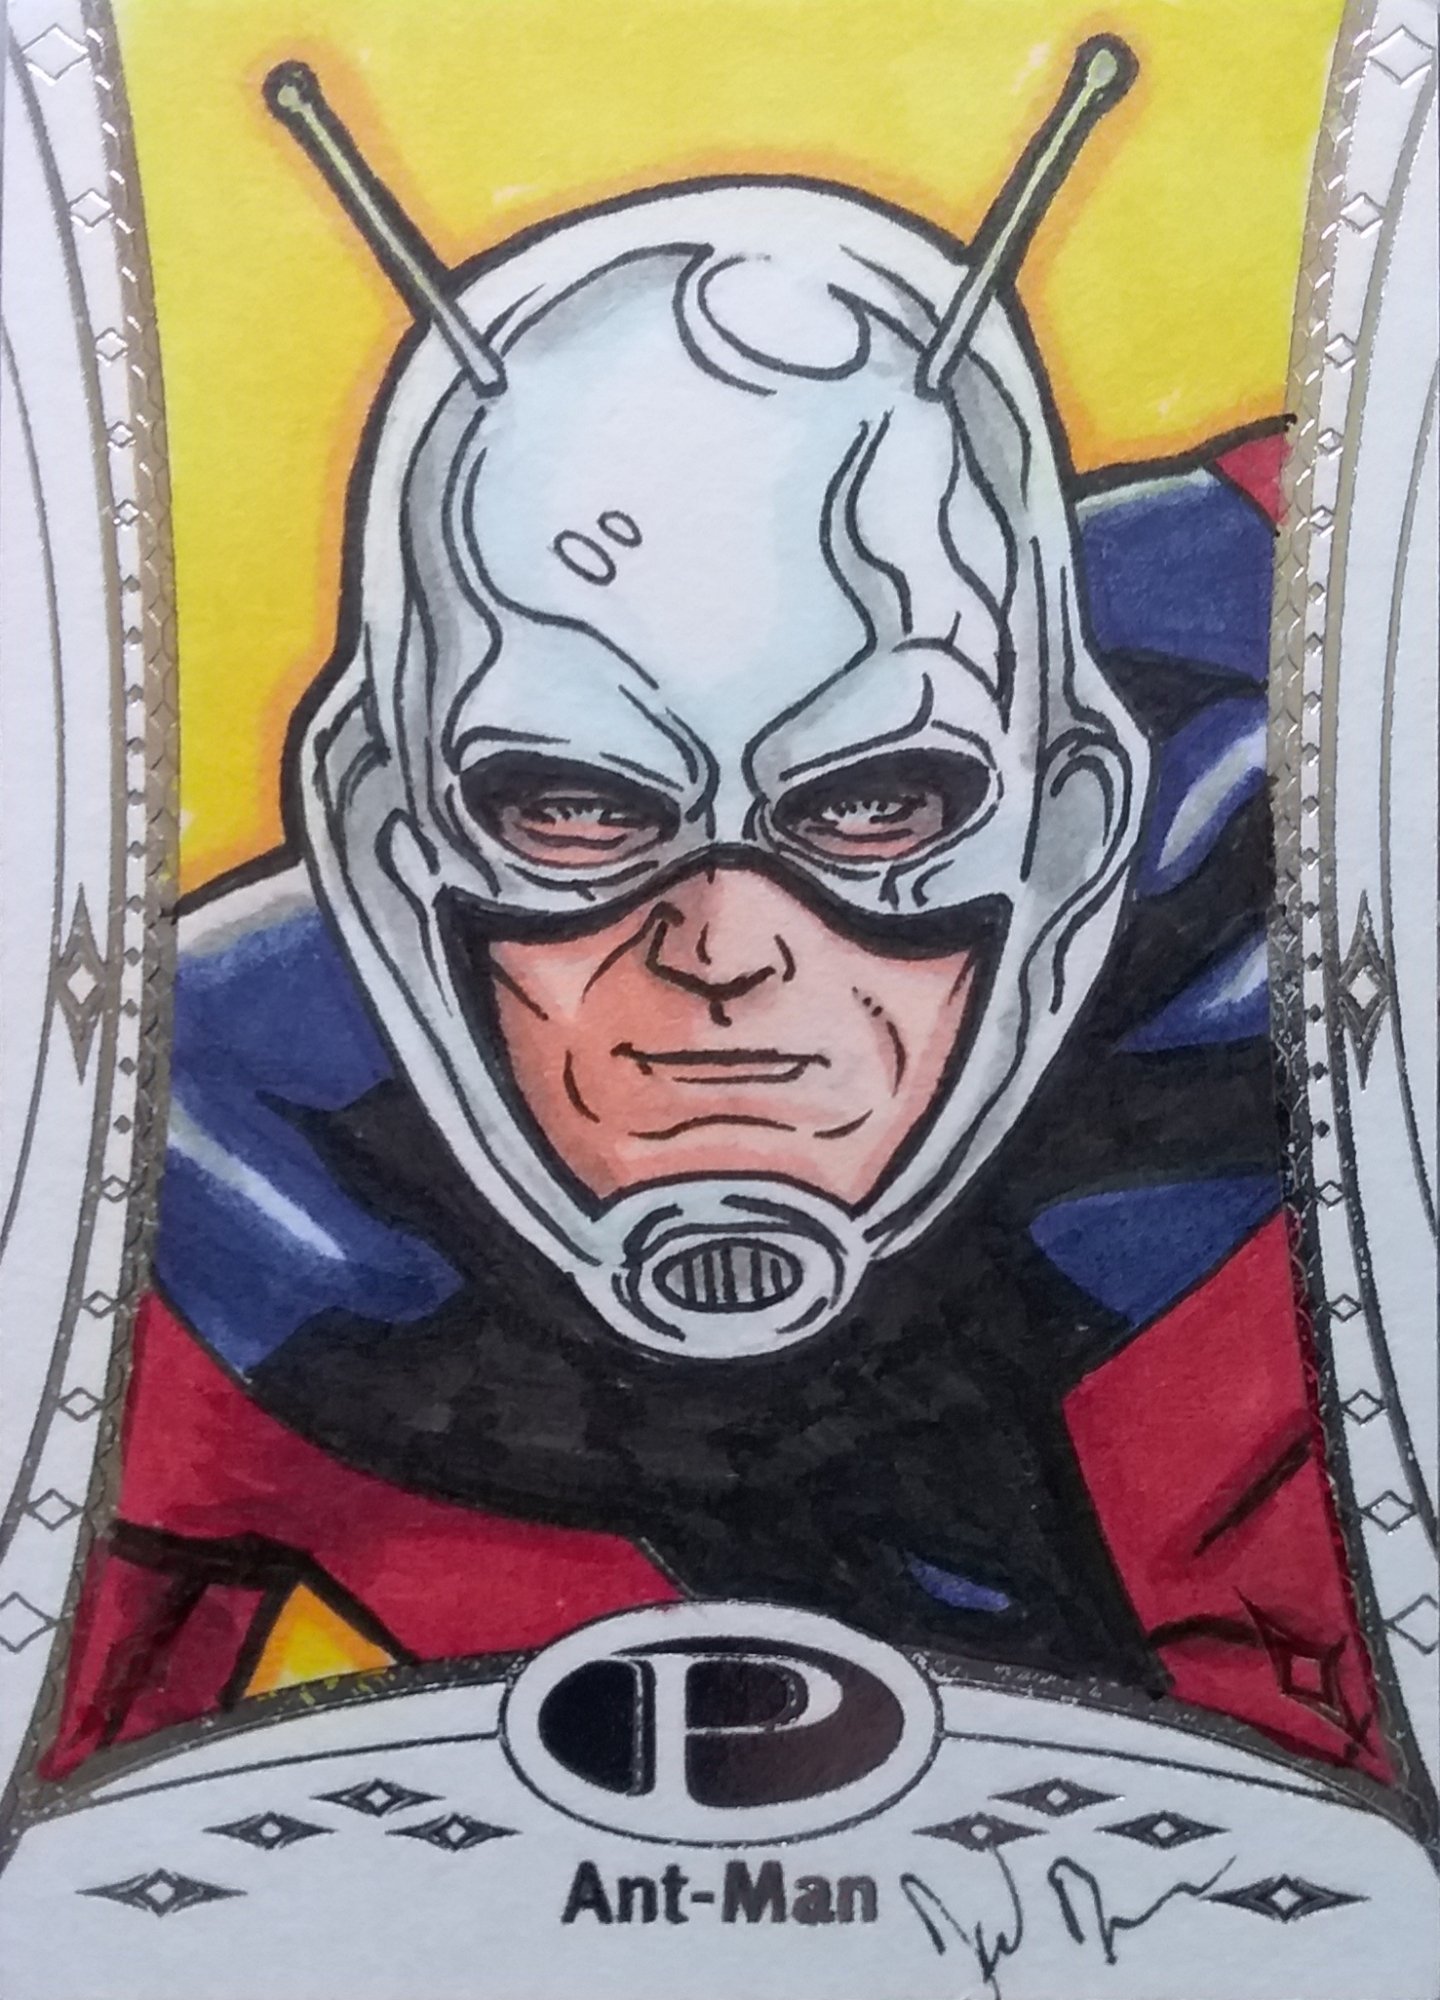 Watched Ant-Man and The Wasp again today! Congratulations to the  @marvelstudios team for another addition to the Marvel MCU!!! Used  @kuretakezig_usa Kure Color markers for this. Referenced the  @hottoyscollectibles figure. #AntManAndTheWasp #AntMan #